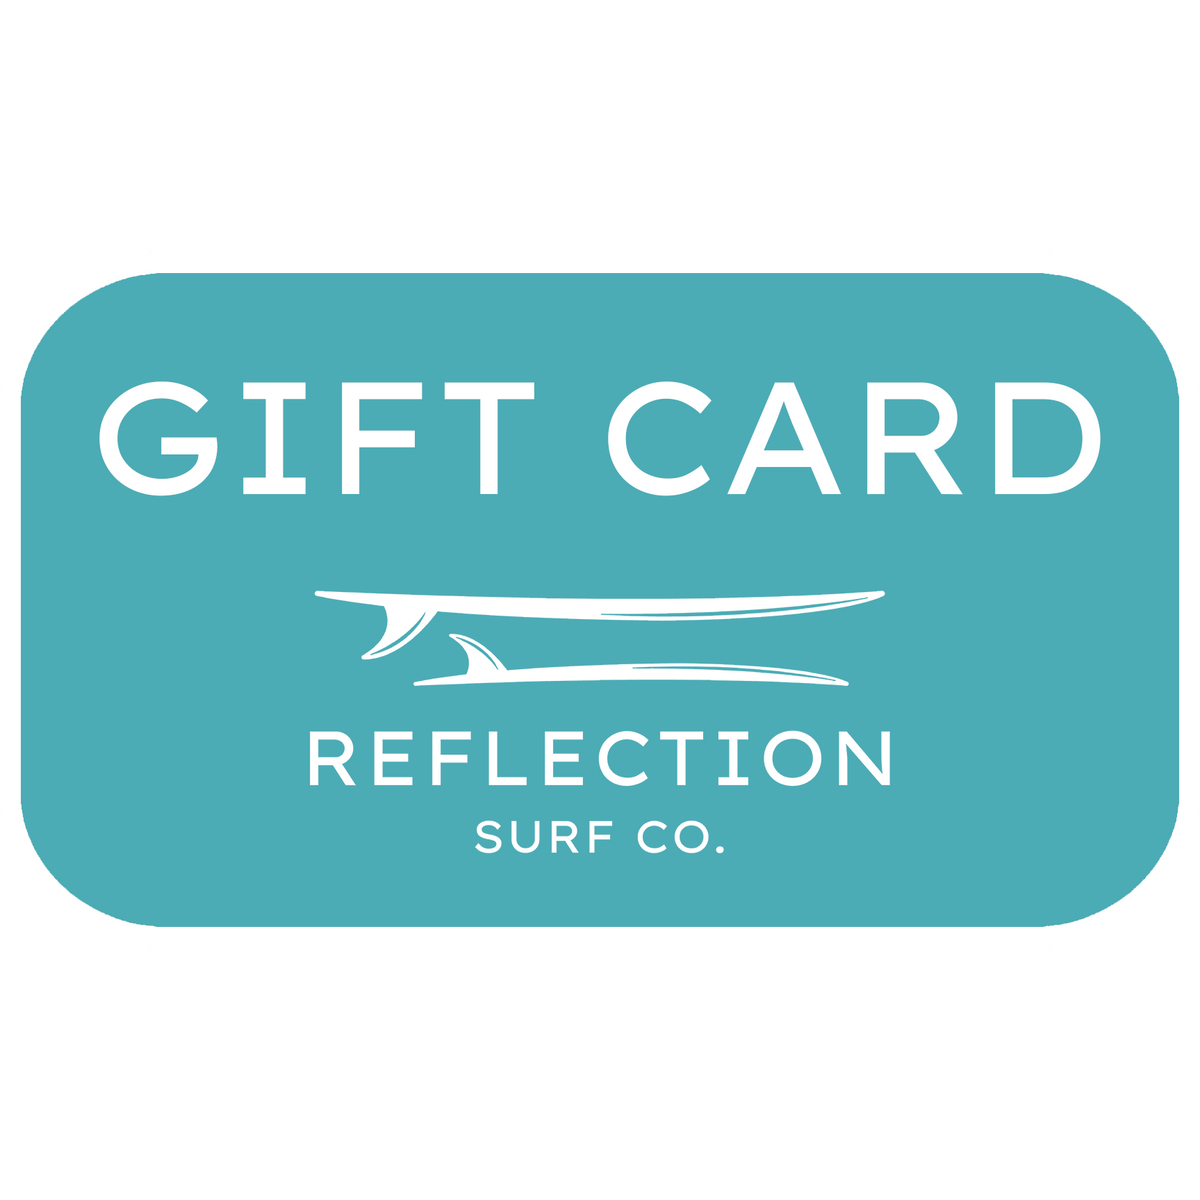 Travel Gift Card